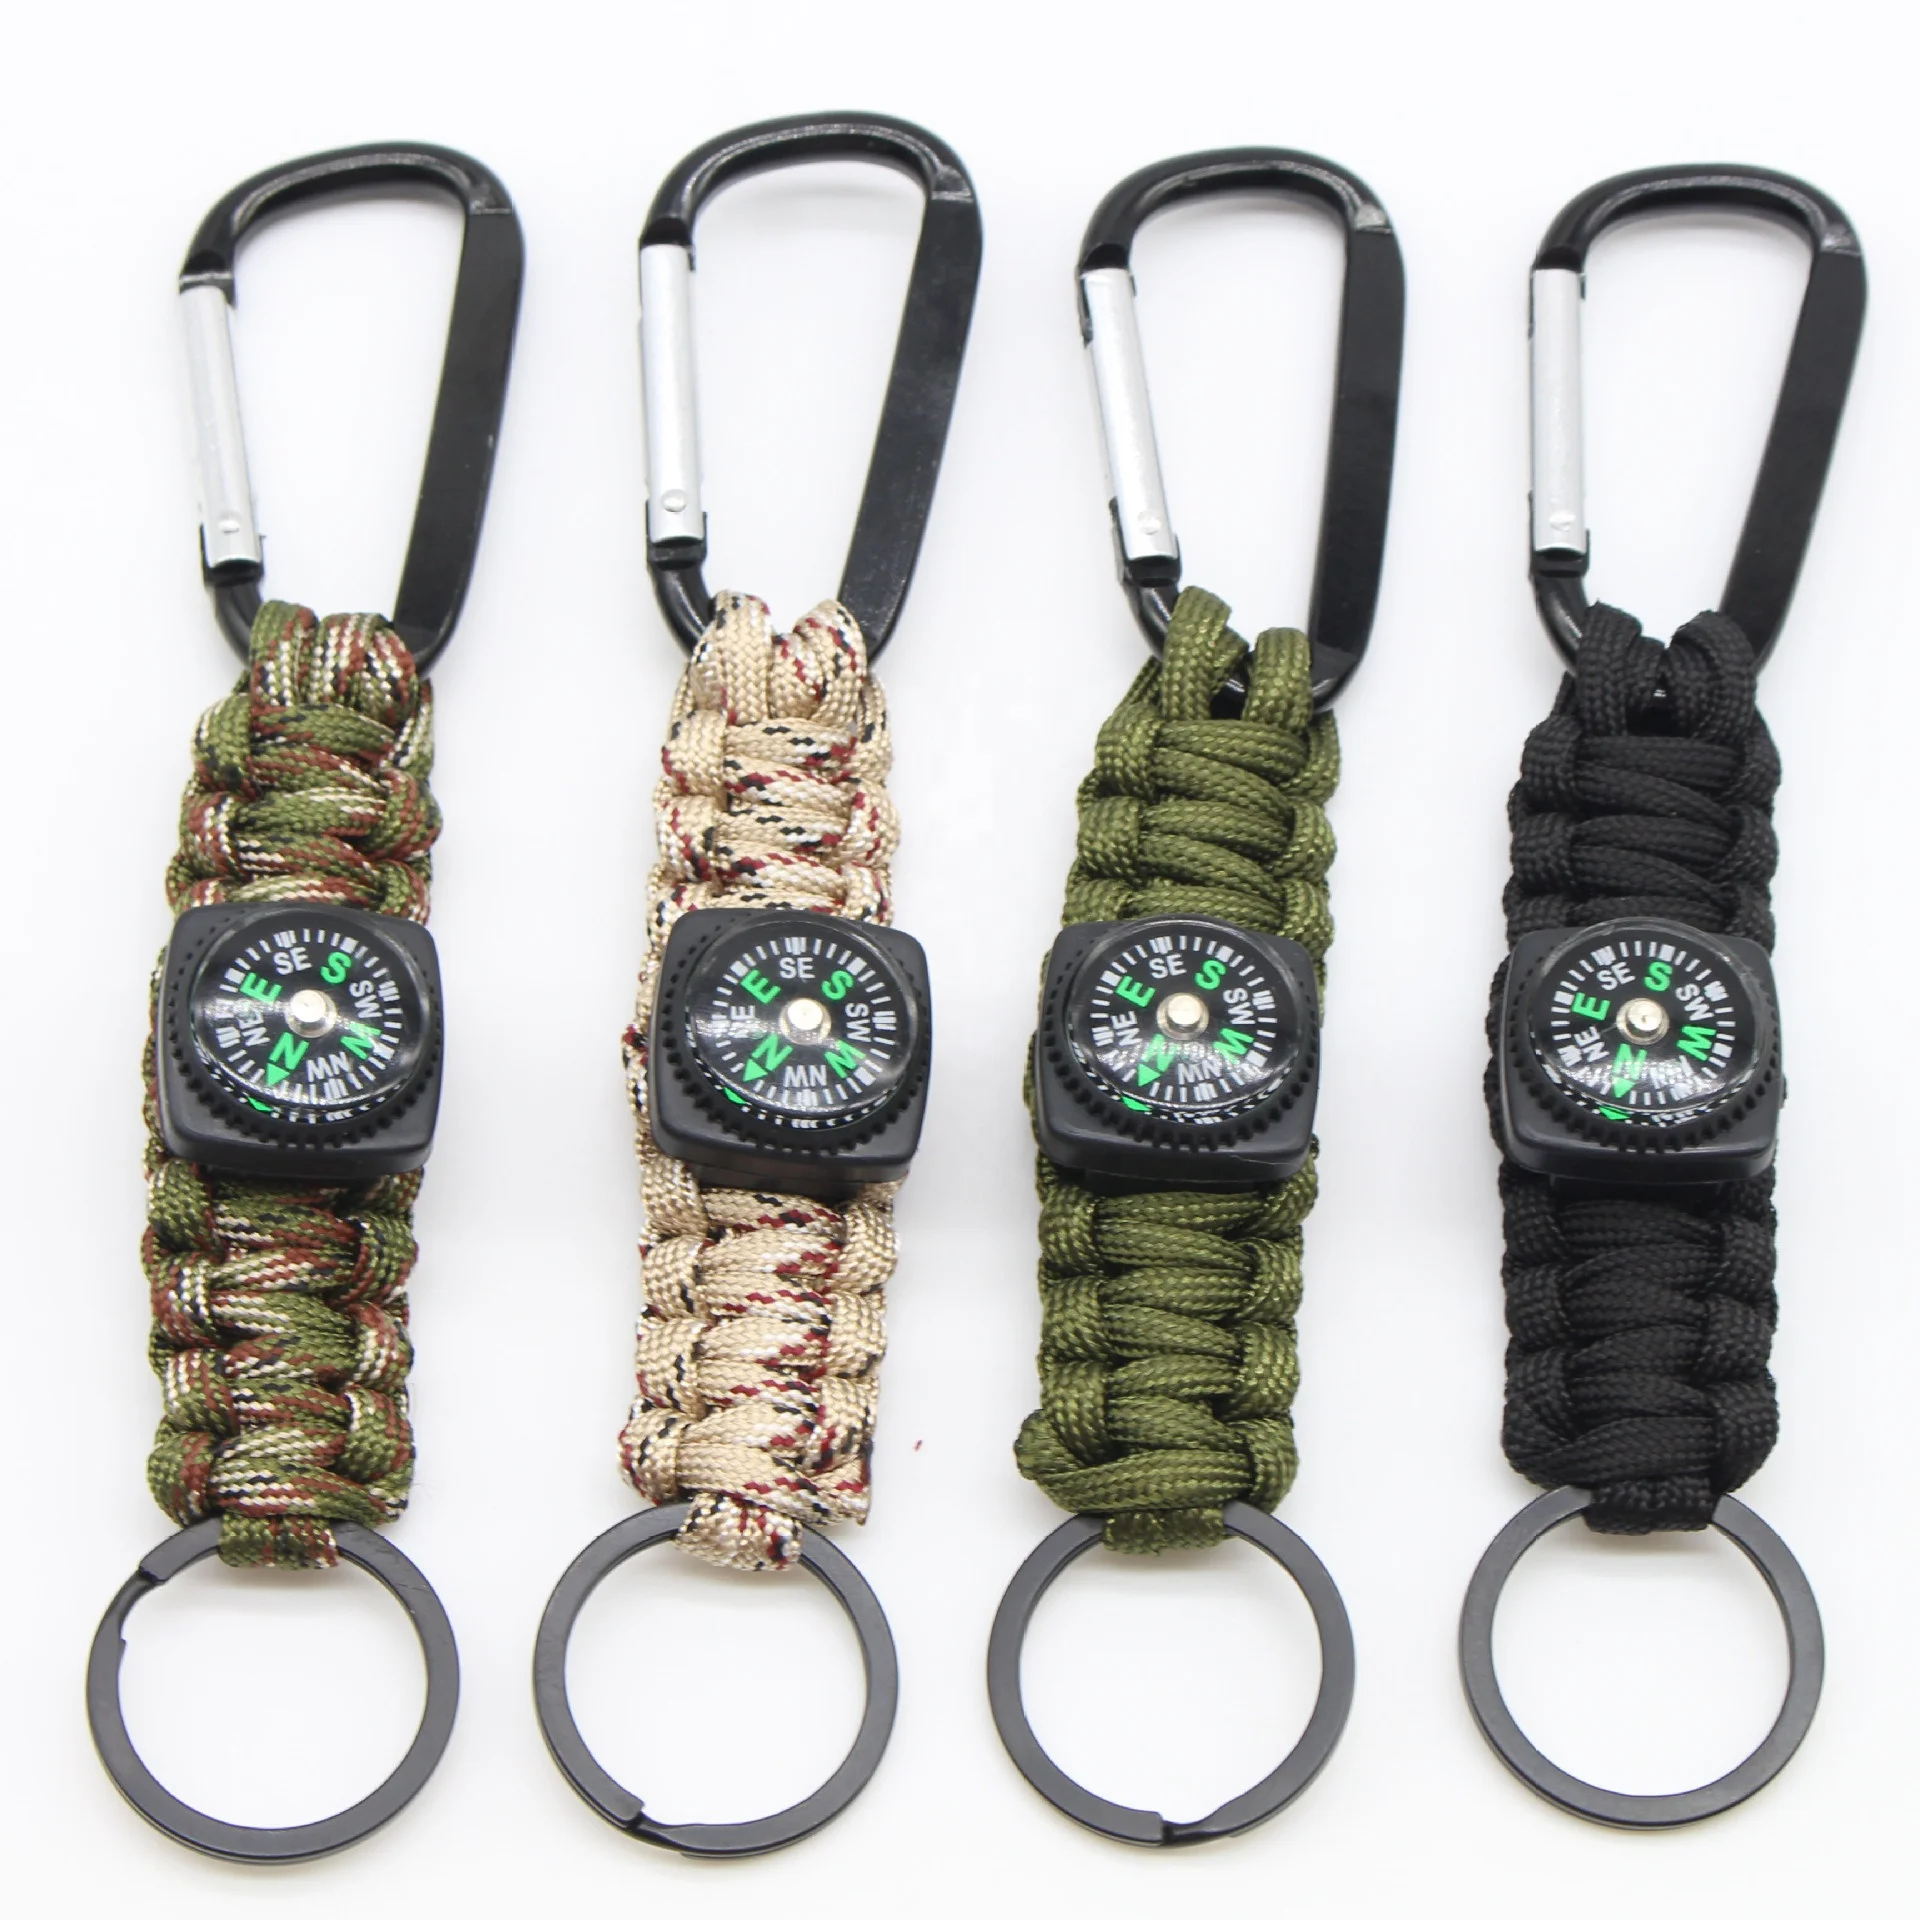 

Outdoor Mens Multifunctional Tactical Survival Paracord Keychain with carabiner and compass, Various colors available